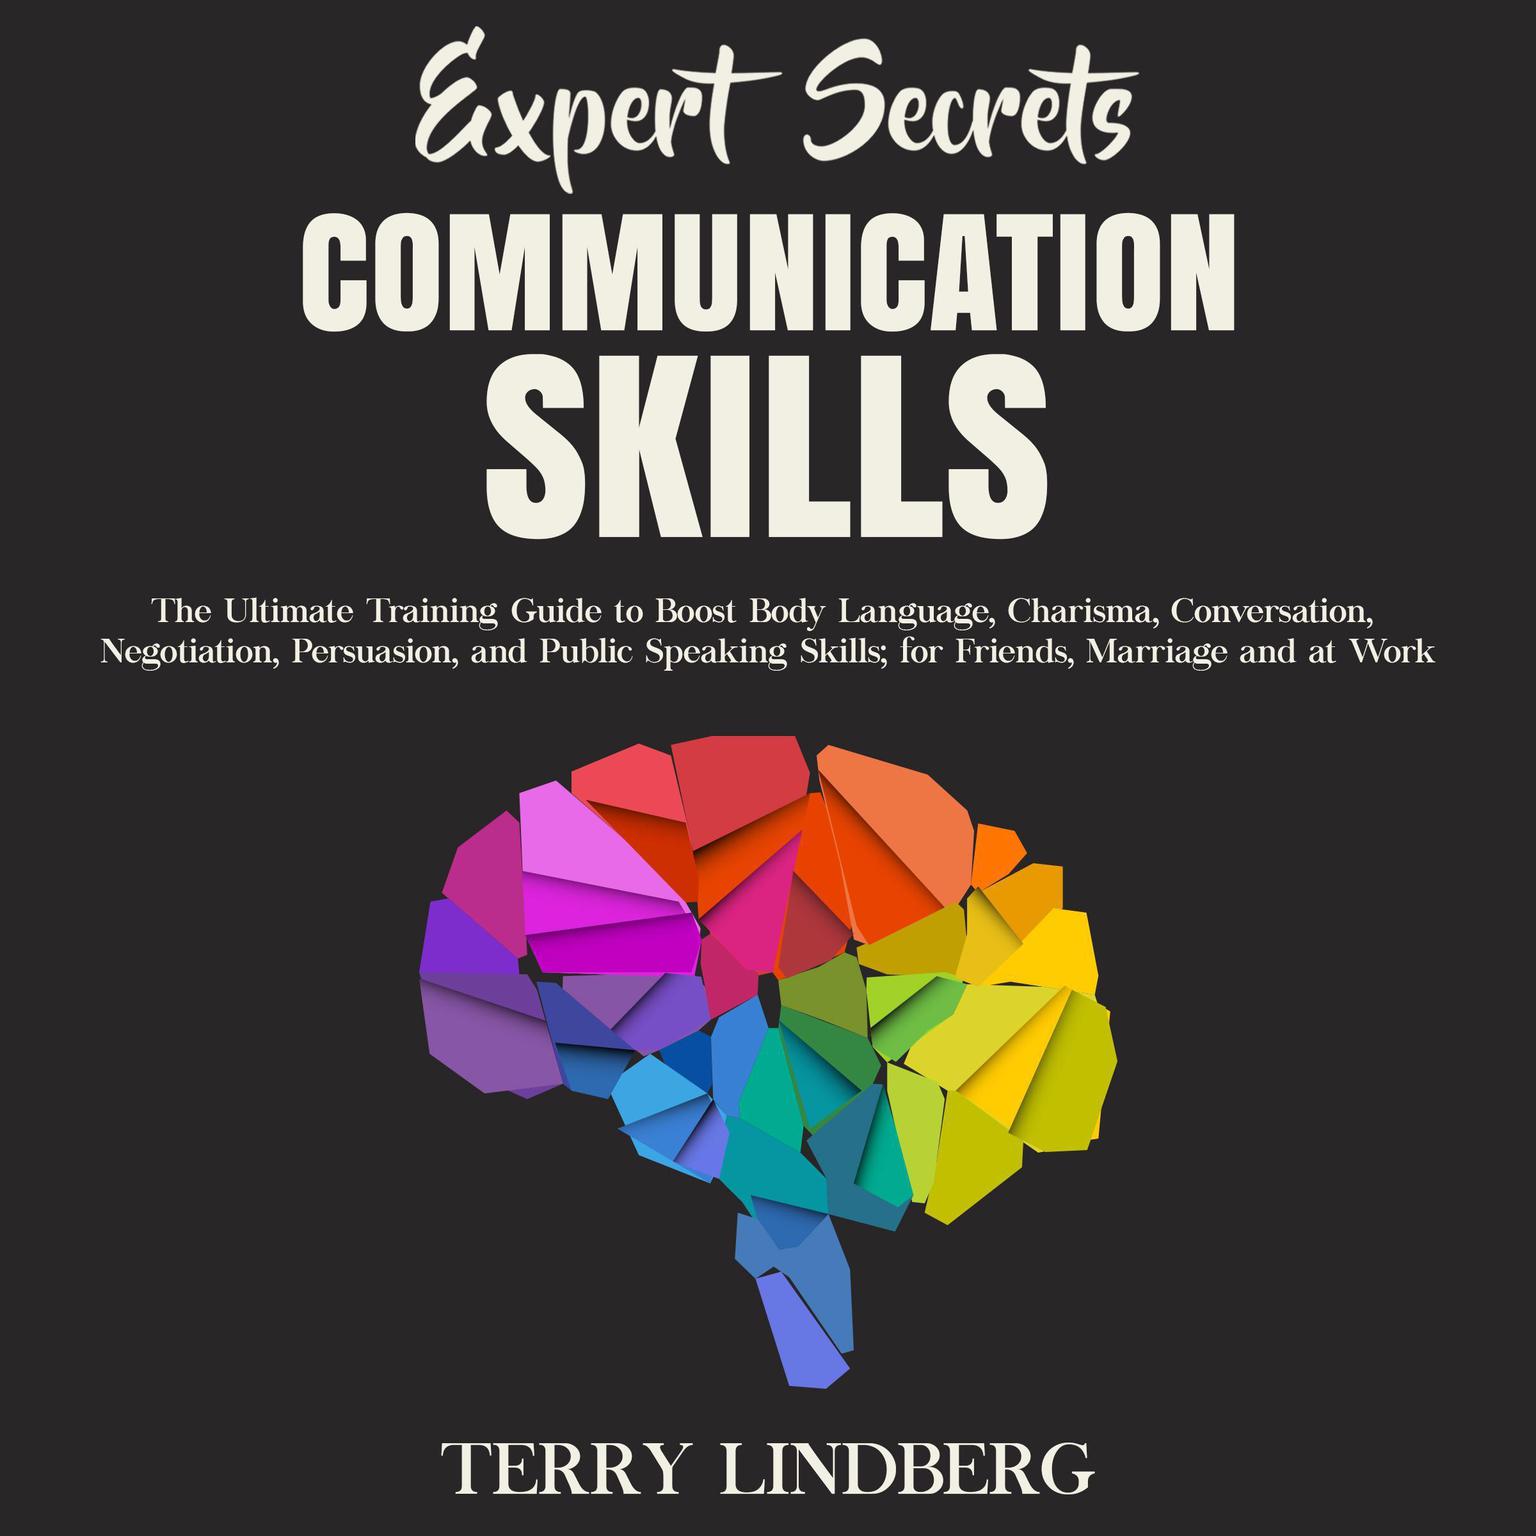 Expert Secrets – Communication Skills: The Ultimate Training Guide to Boost Body Language, Charisma, Conversation, Negotiation, Persuasion, and Public Speaking Skills; for Friends, Marriage and at Work. Audiobook, by Terry Lindberg